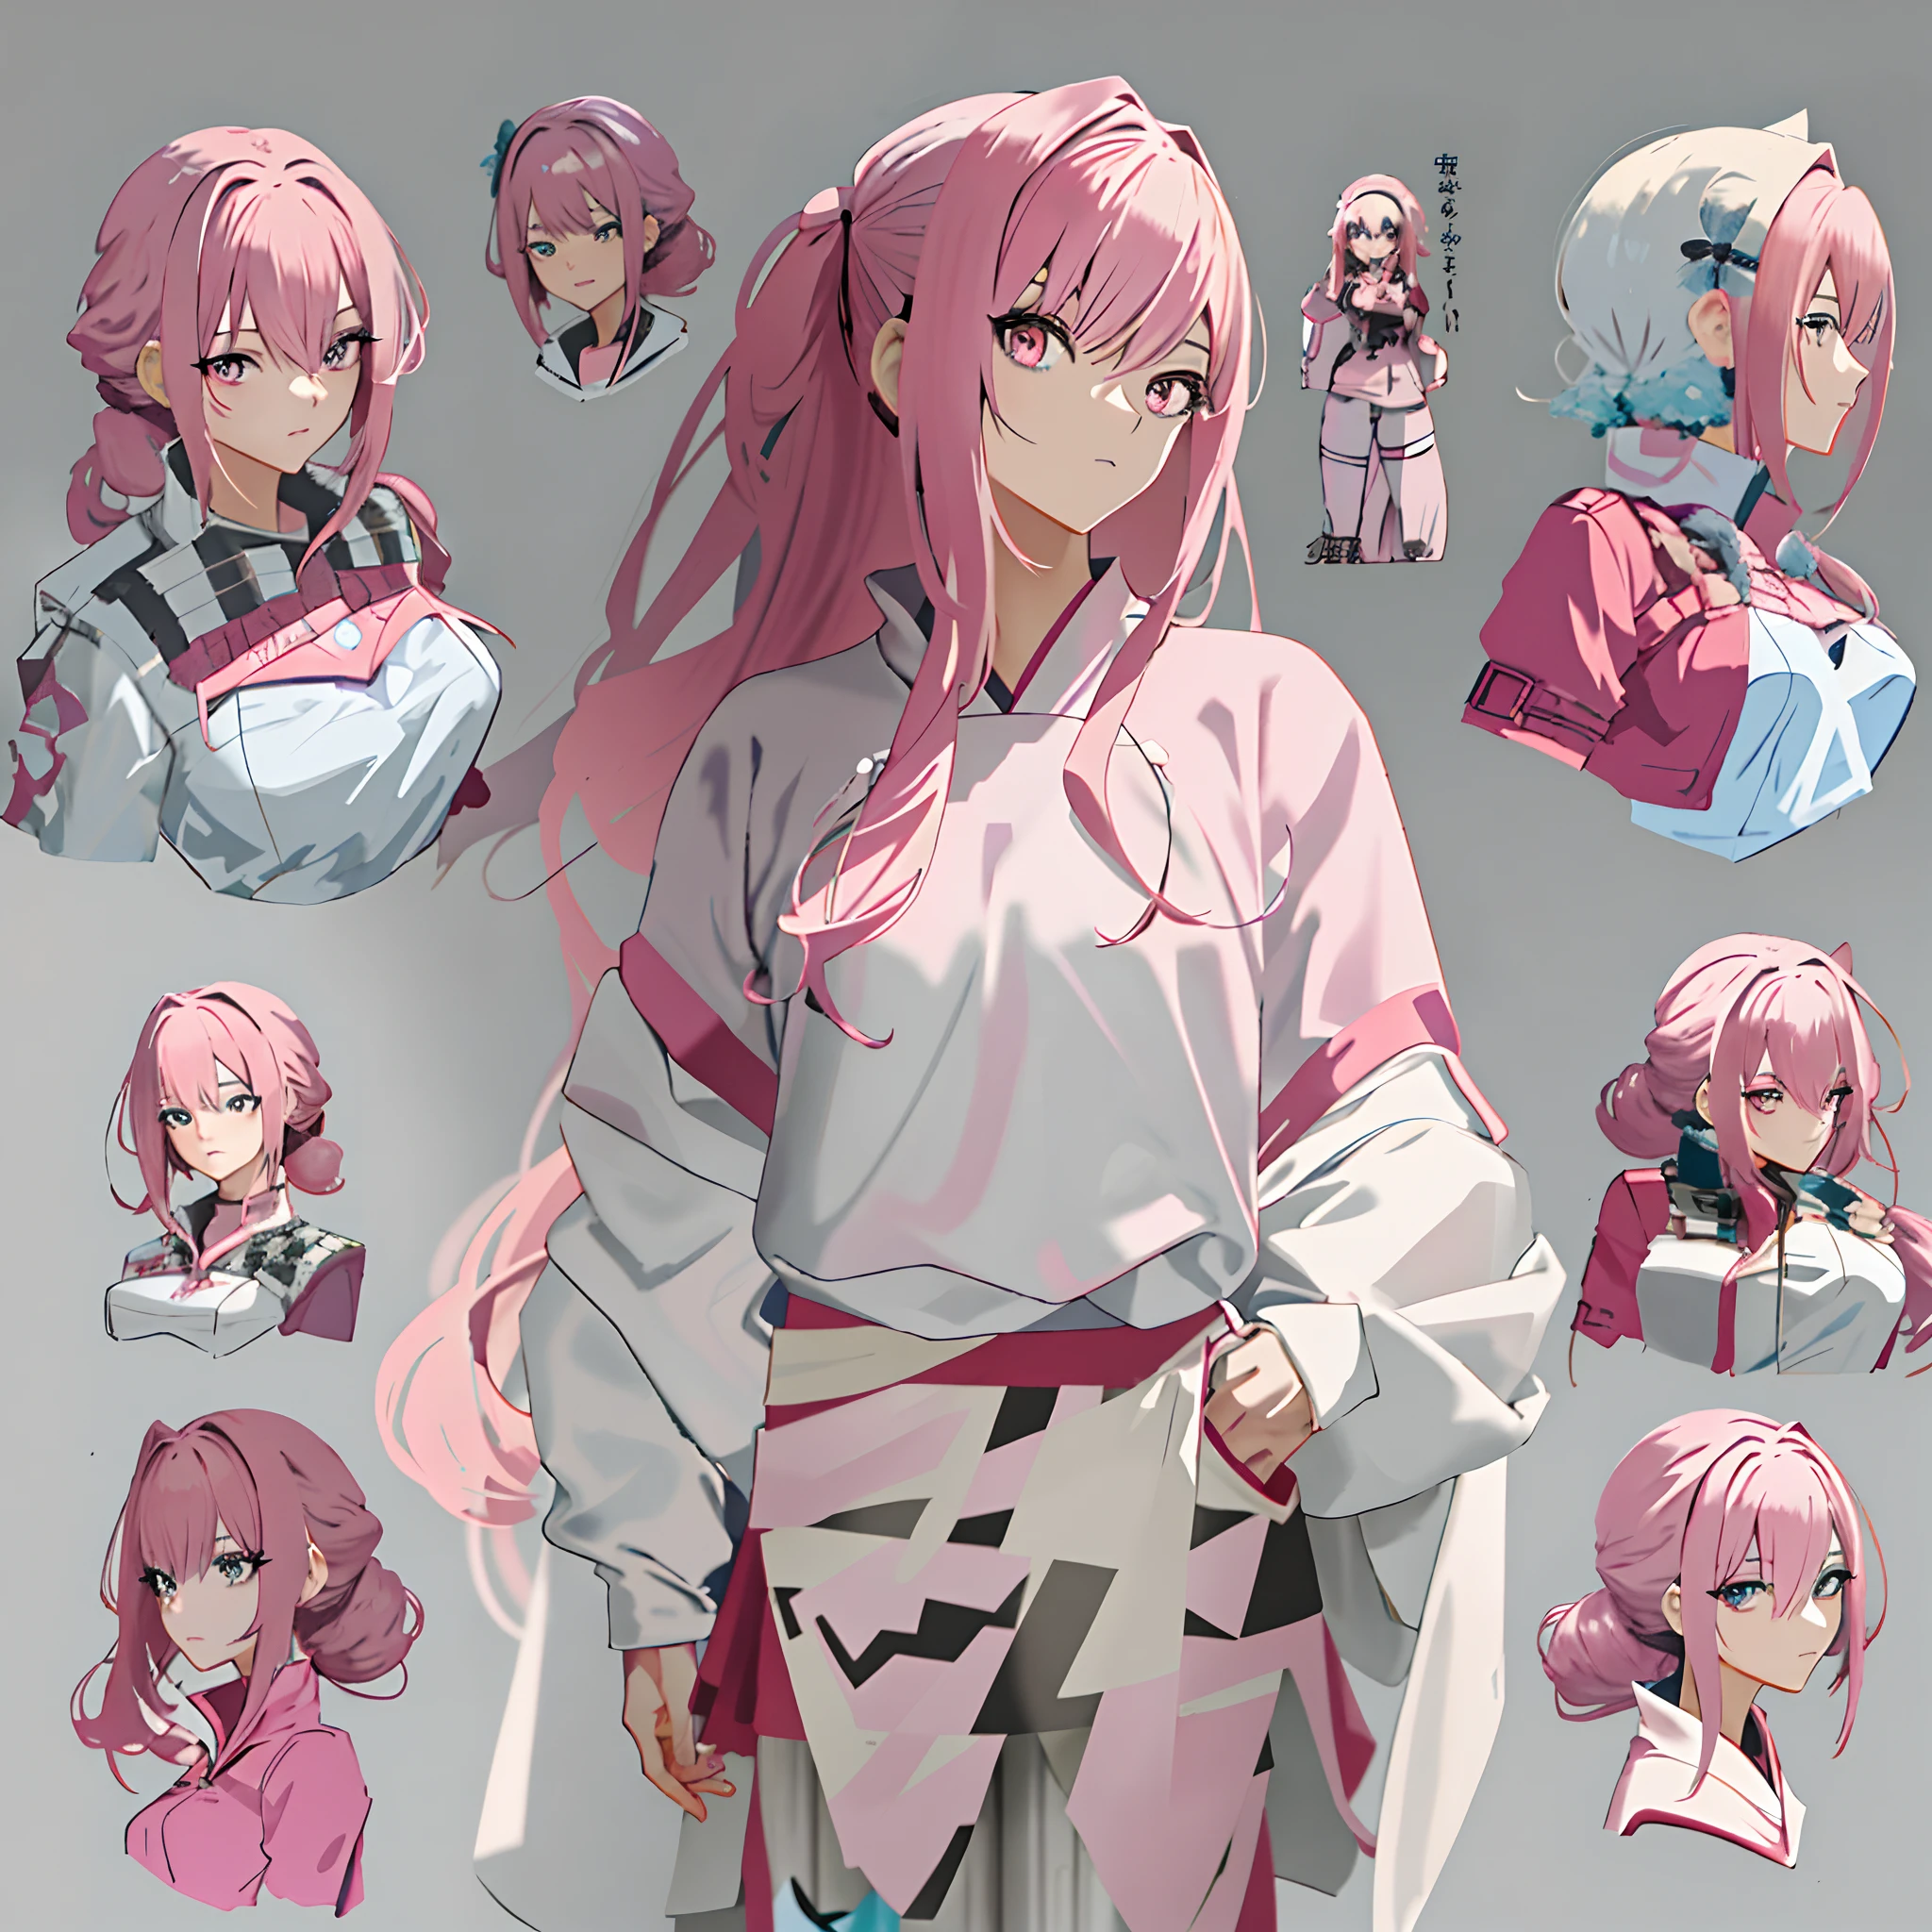 Anime character pose of a woman with pink hair and various facial expressions, detailed anime character art, Anime character art, trending on artstation pixiv, anime concept art, Guweiz in Pixiv ArtStation, Anime character design, anime figure, Guweiz on ArtStation Pixiv, pink twintail hair and cyan eyes, Pixiv style, anime style character